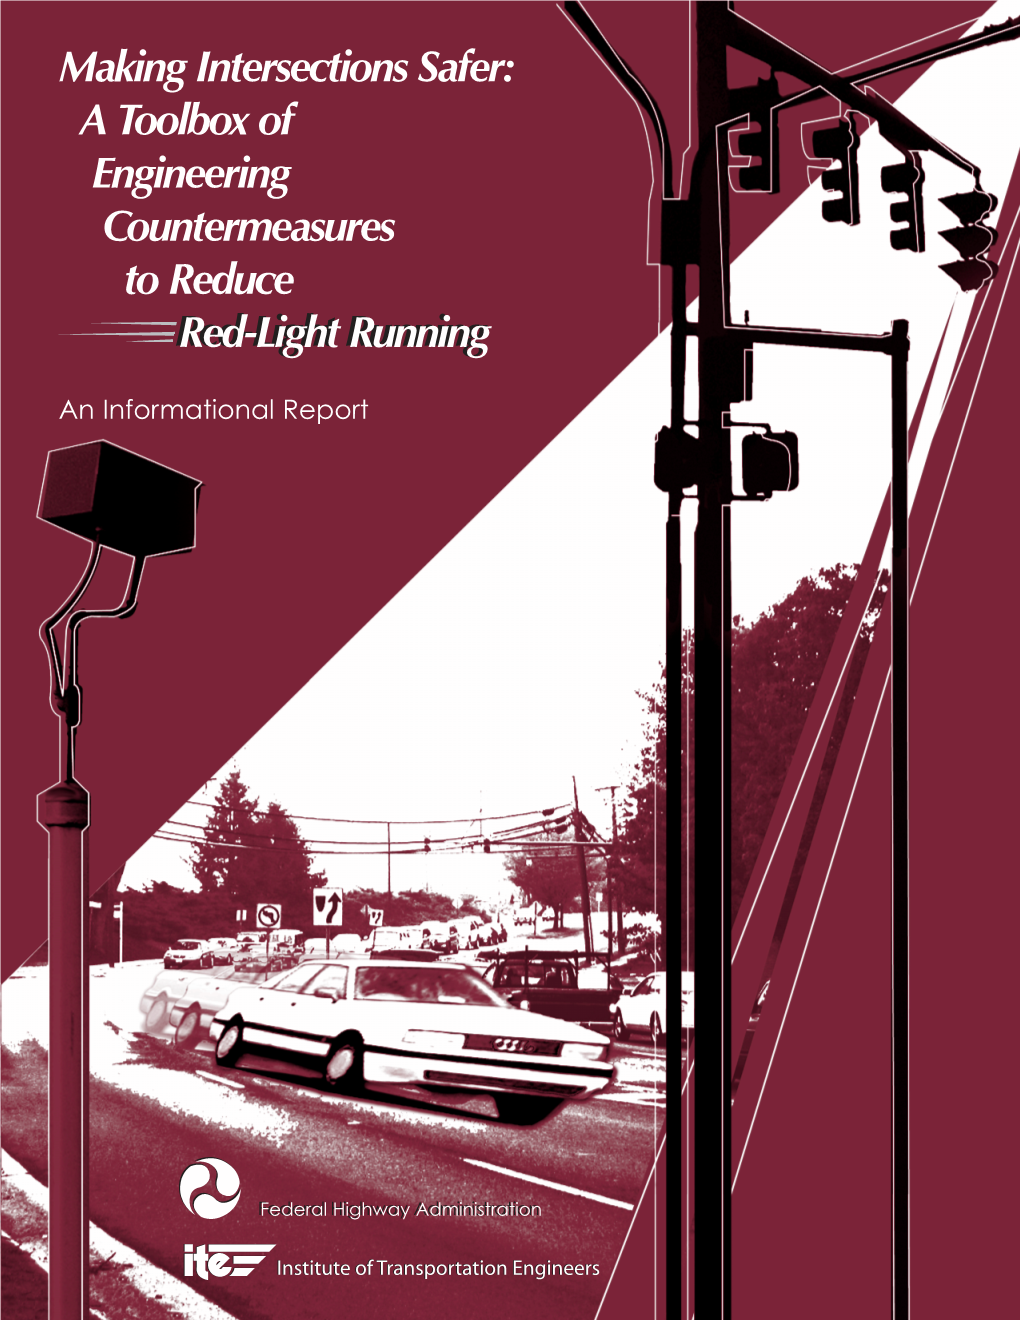 Making Intersections Safer: a Toolbox of Engineering Countermeasures to Reduce Red-Light Running